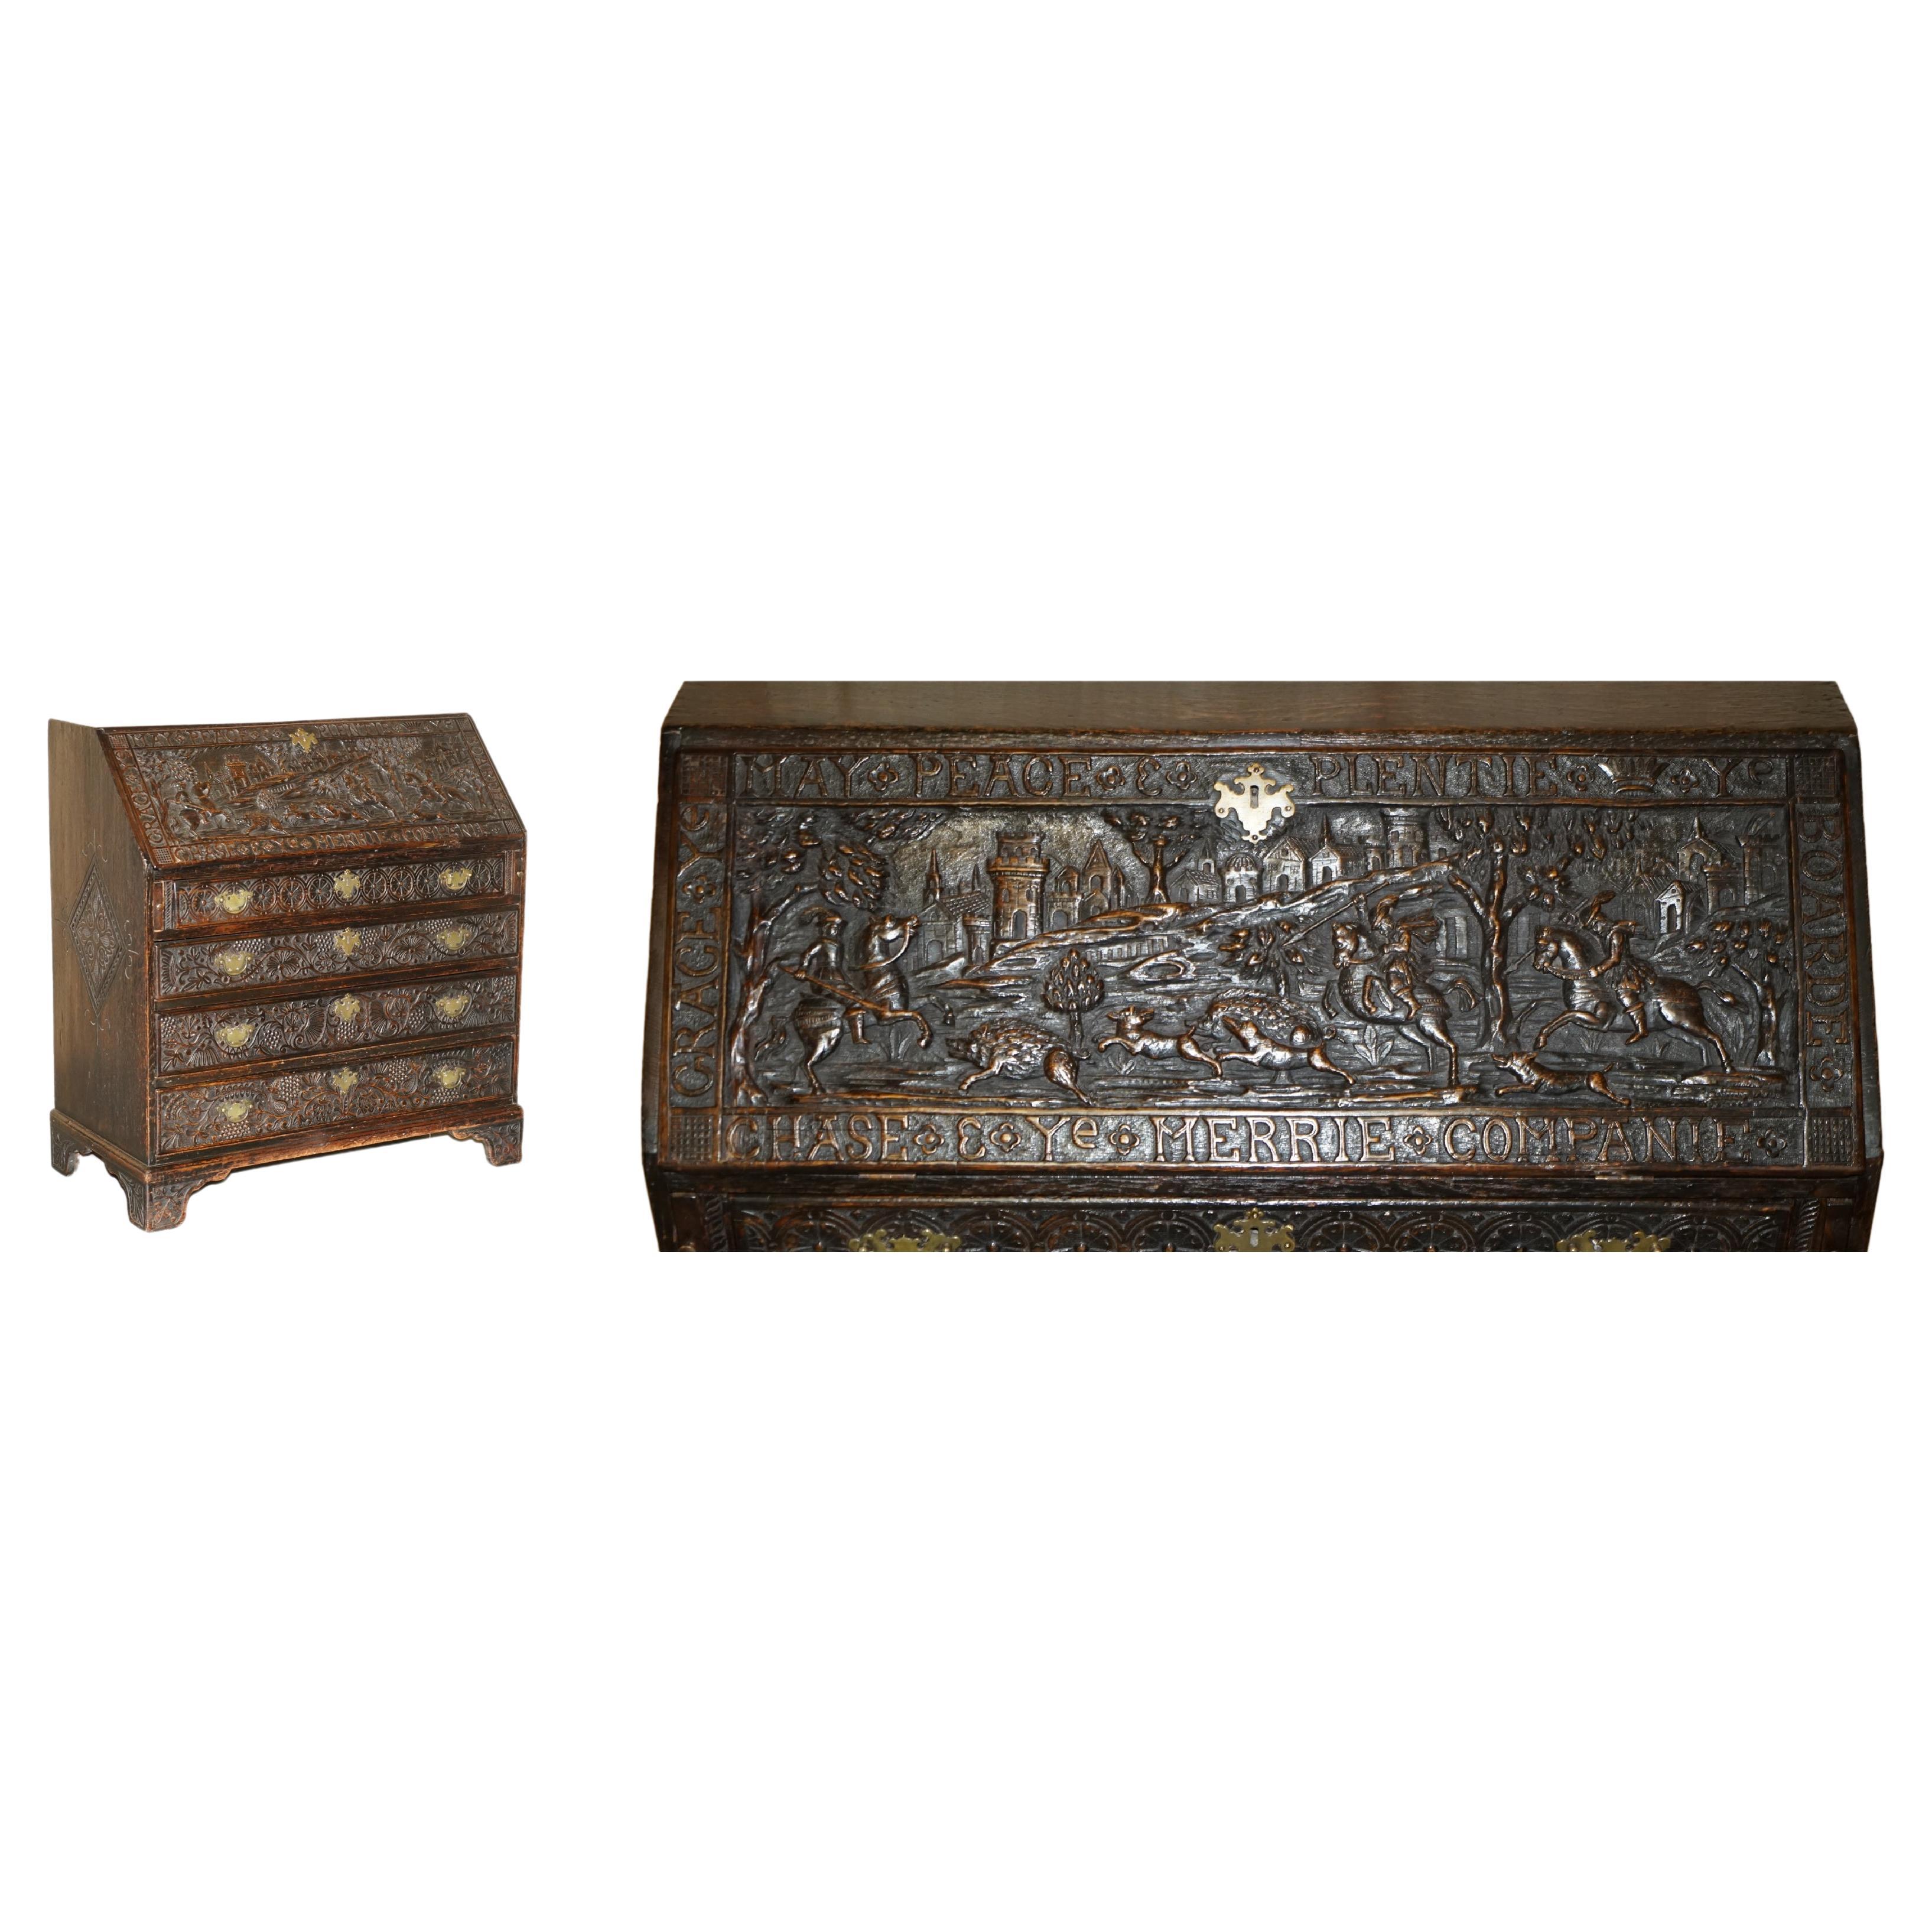 Antique Stunning circa 1780 Jacobean Hand Carved Bureau Desk with Hunting Scene For Sale